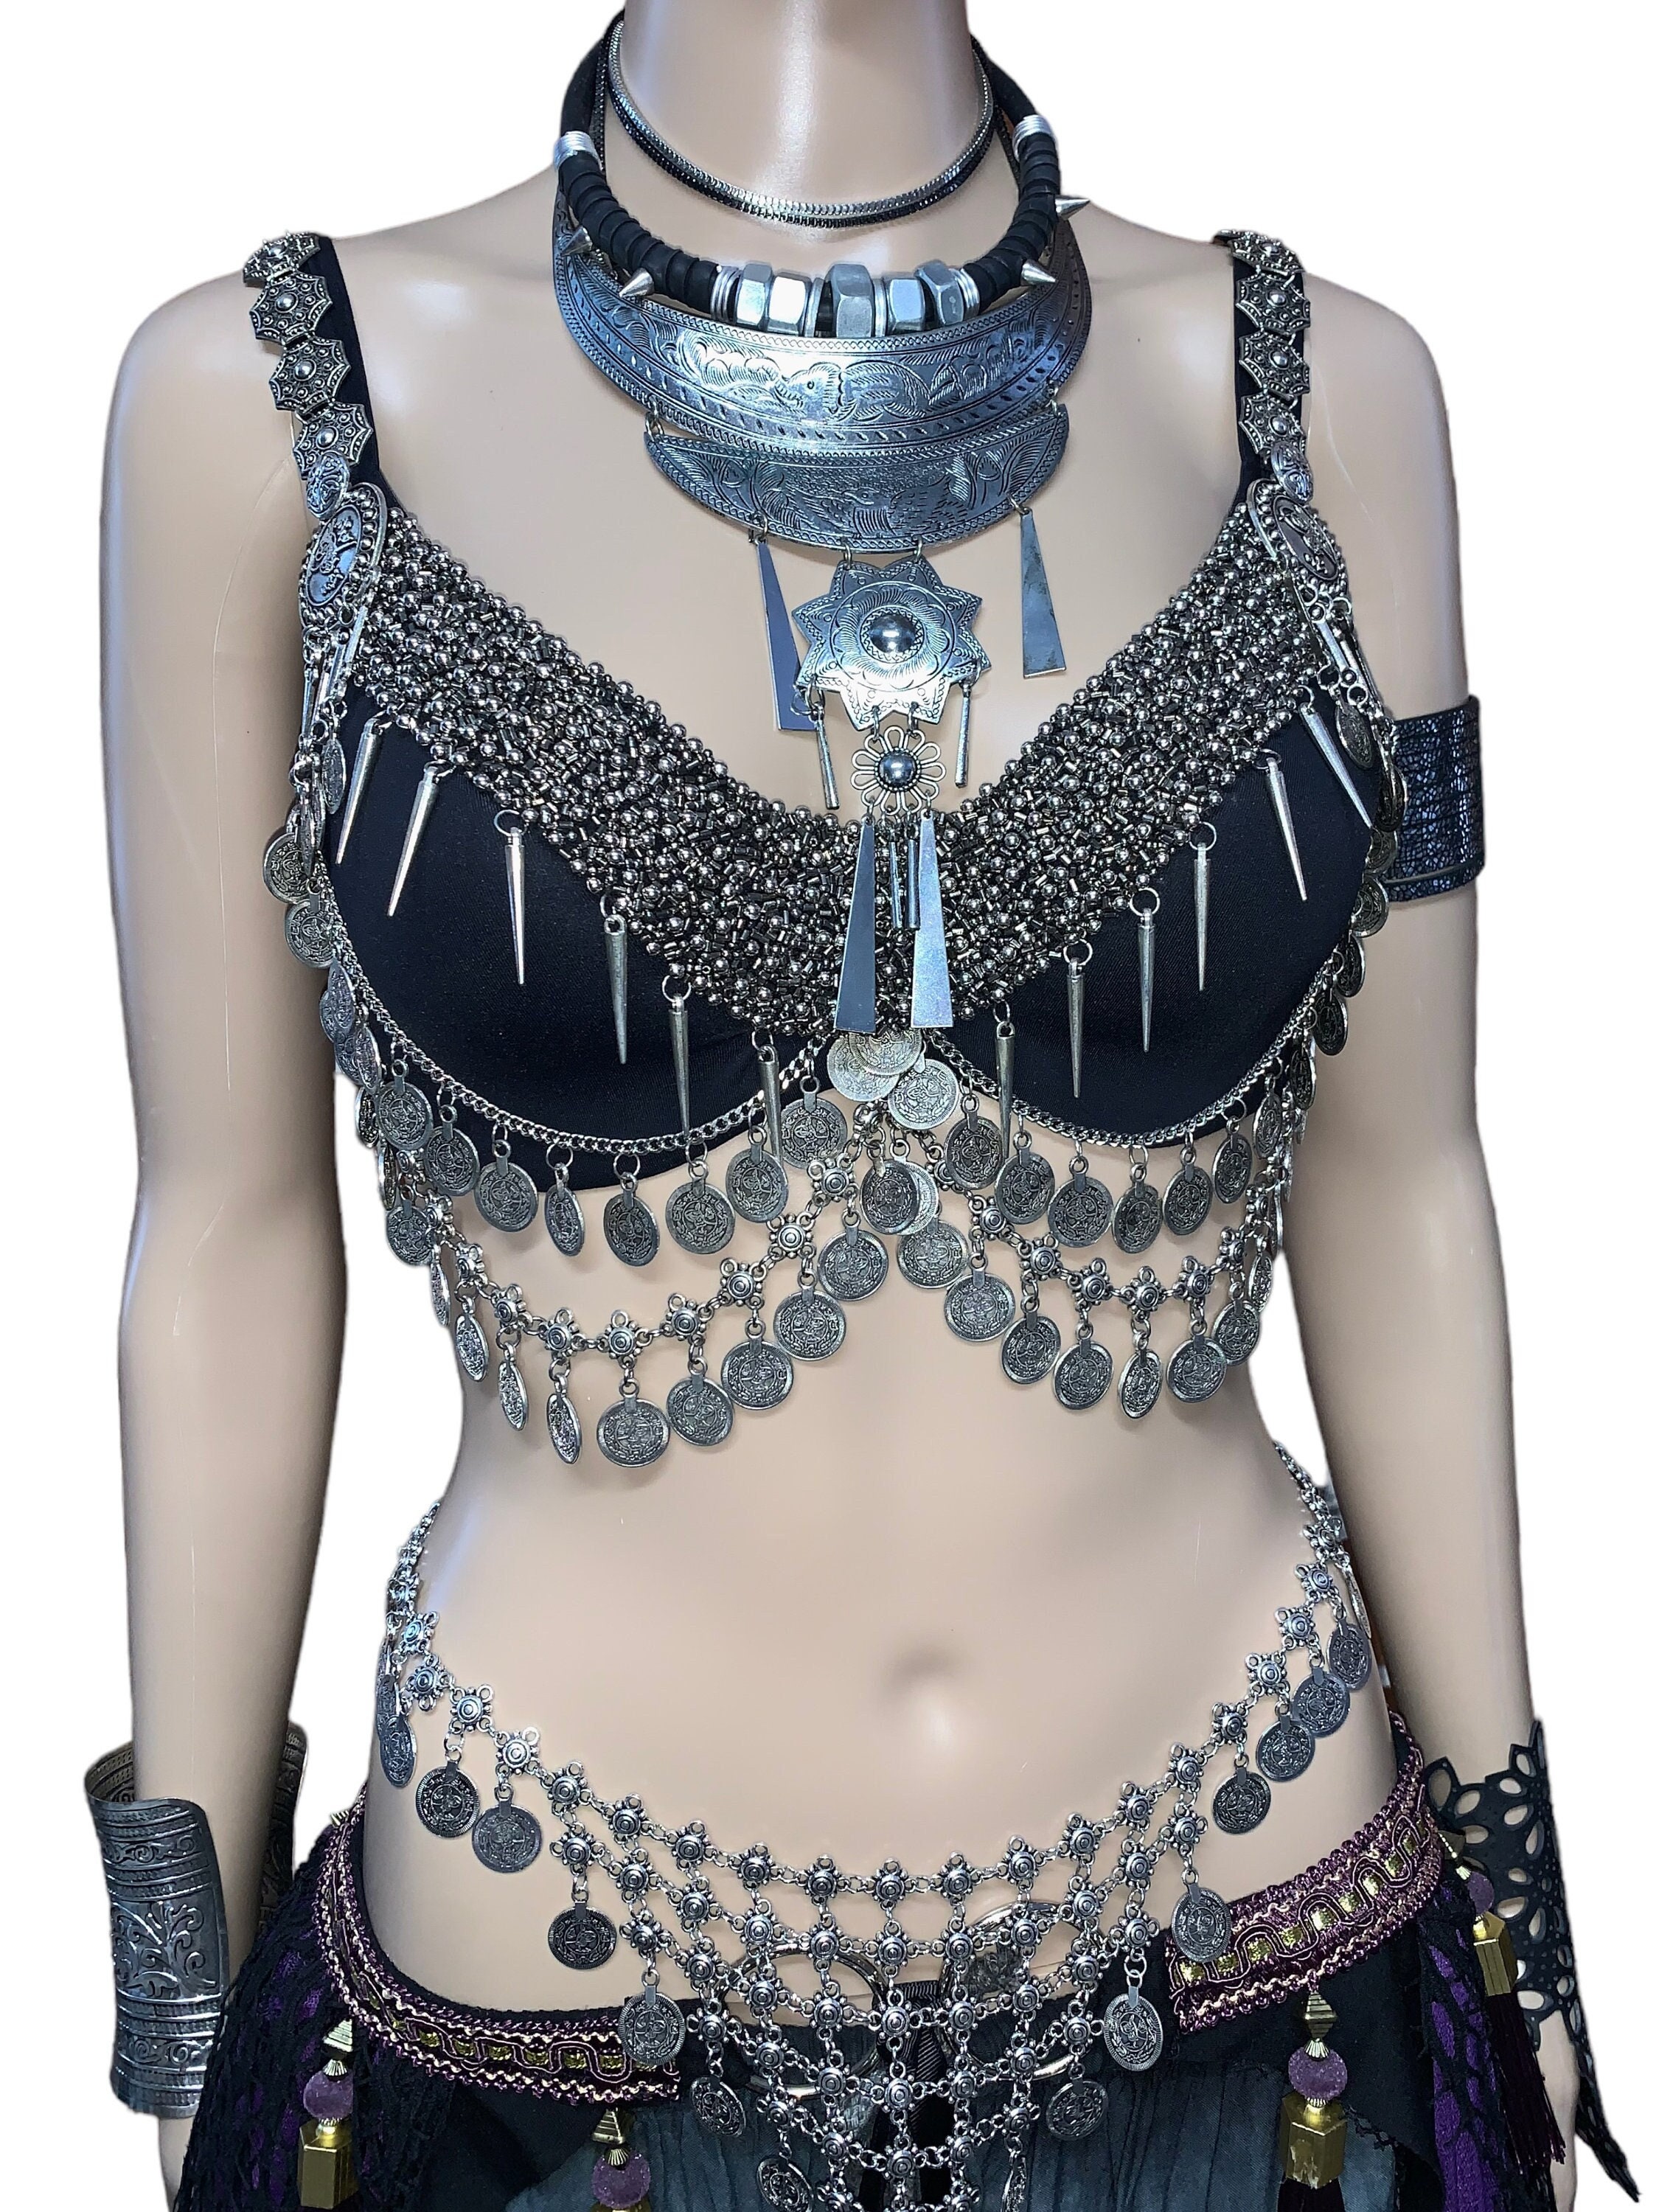 Tribal Fusion Belly Dance Bra With Silver Coins and Afghani Jewelry Accents  shaped Hard Cup -  New Zealand